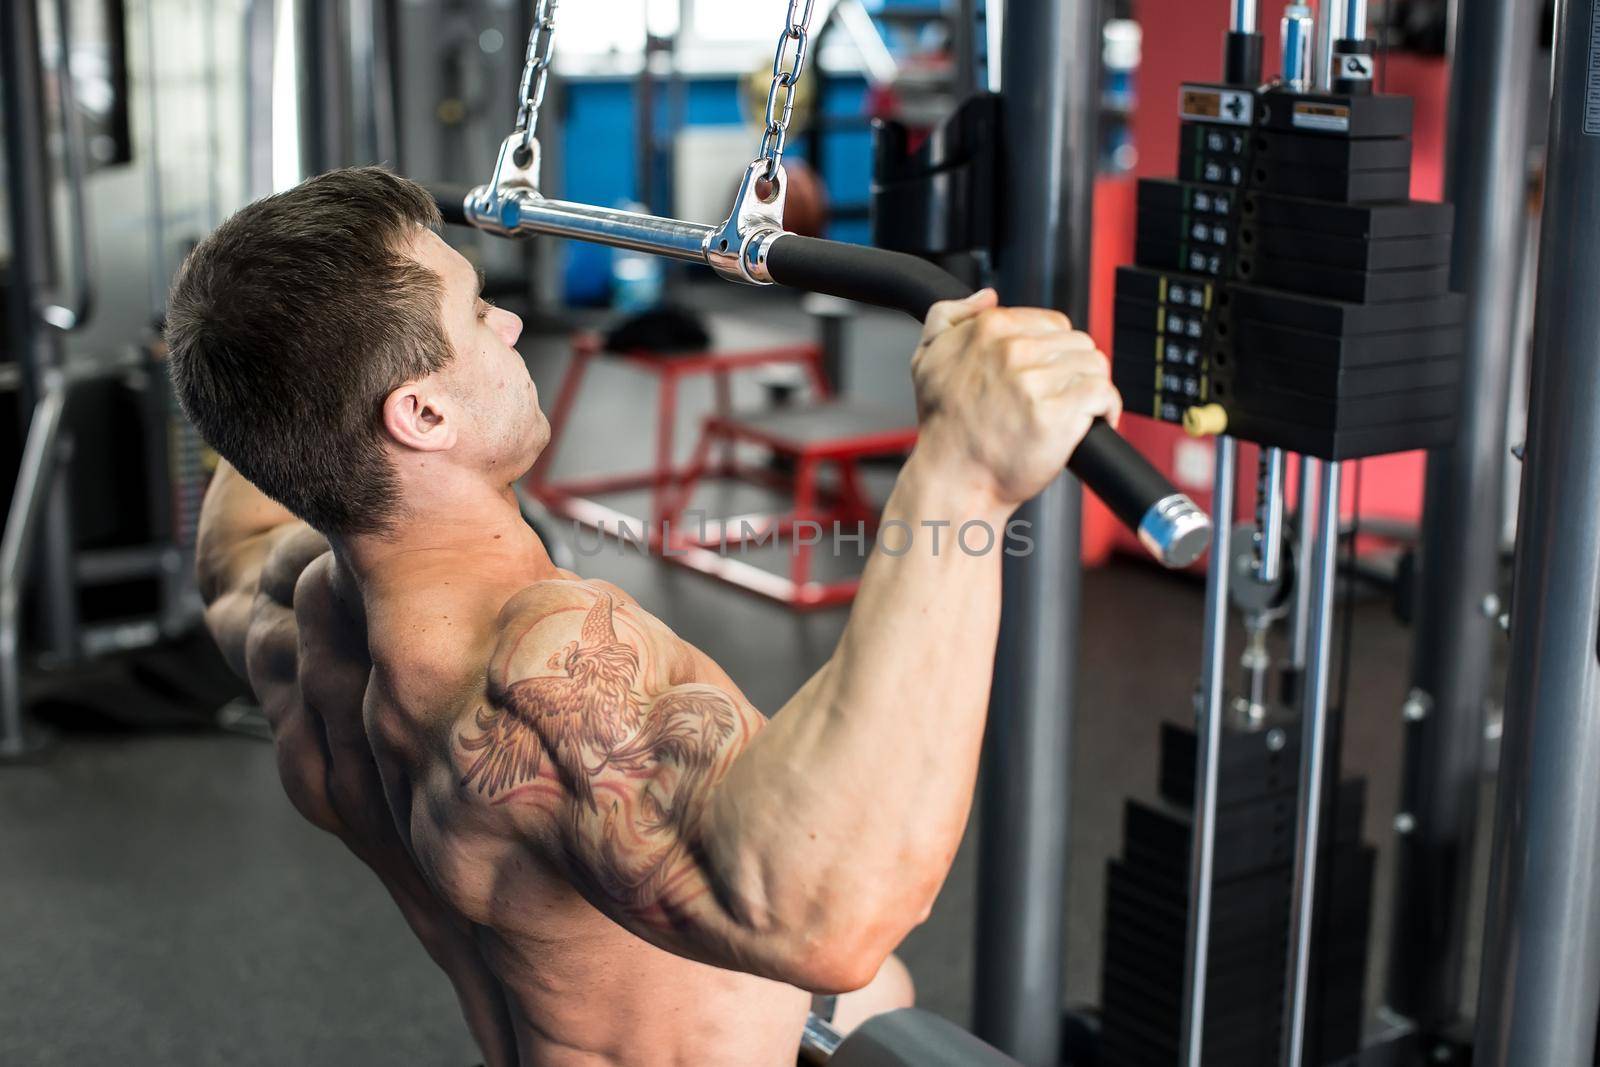 Shoulder pull down machine. Fitness man working out lat pulldown training at gym. Upper body strength exercise for the upper back.